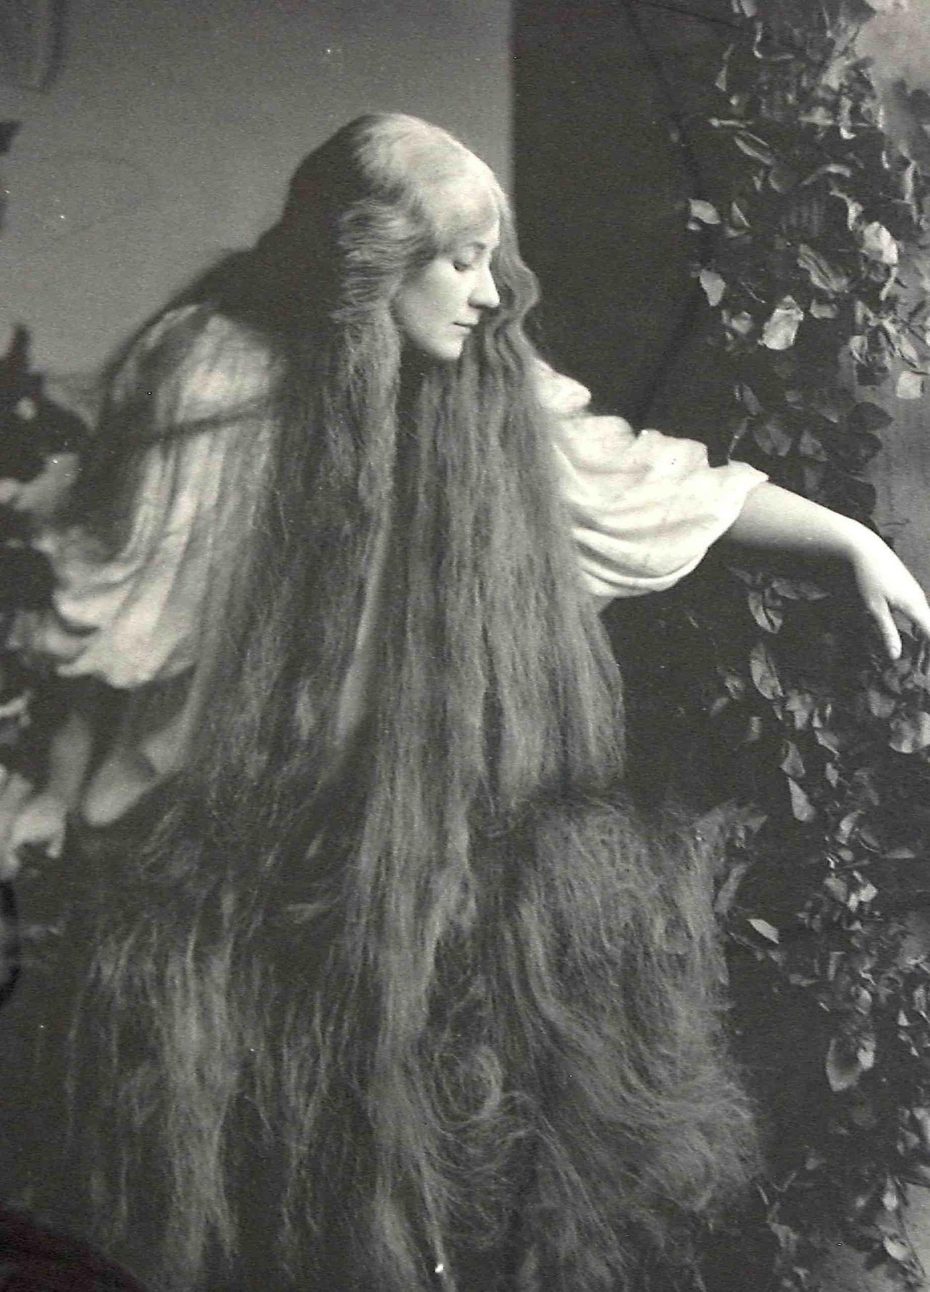 Victorian Woman With Long Cascading Hair Most Likely She Was A Model And Actress Intended To